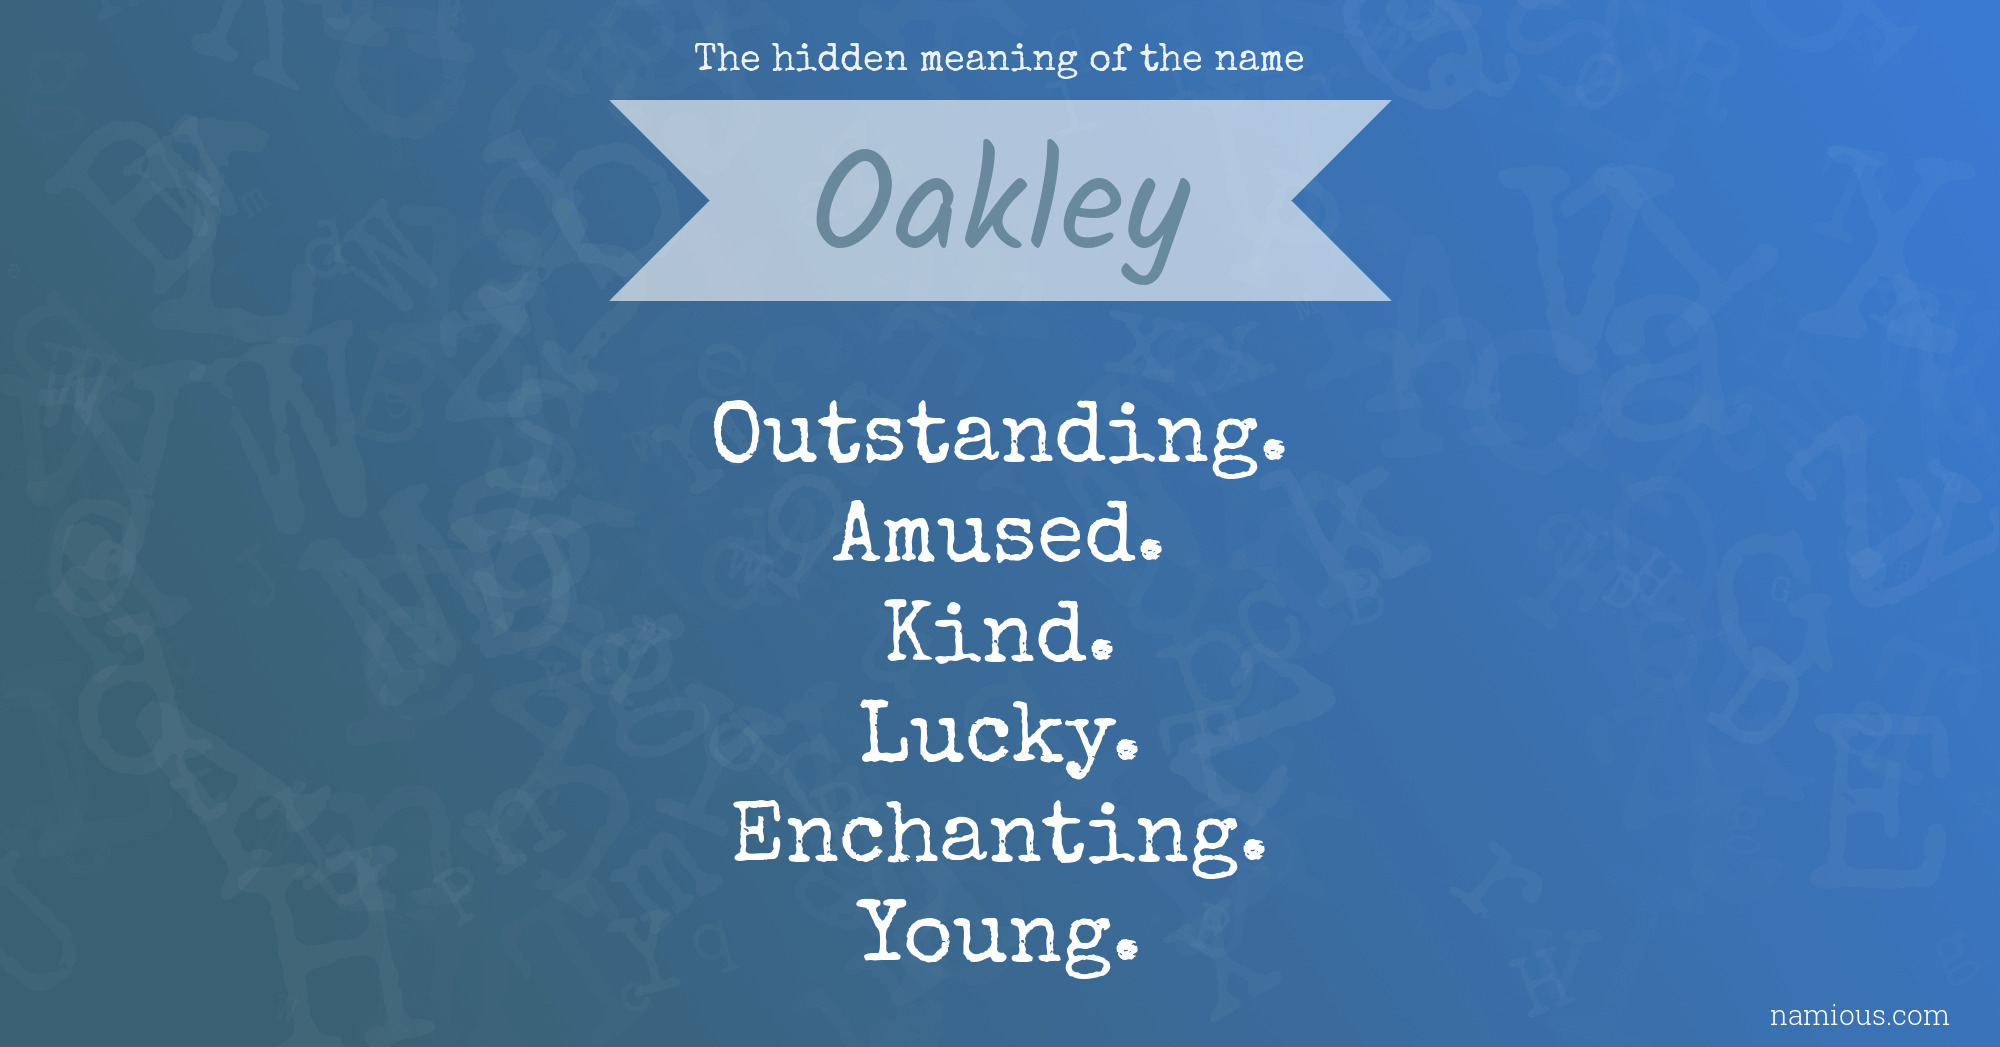 The hidden meaning of the name Oakley | Namious